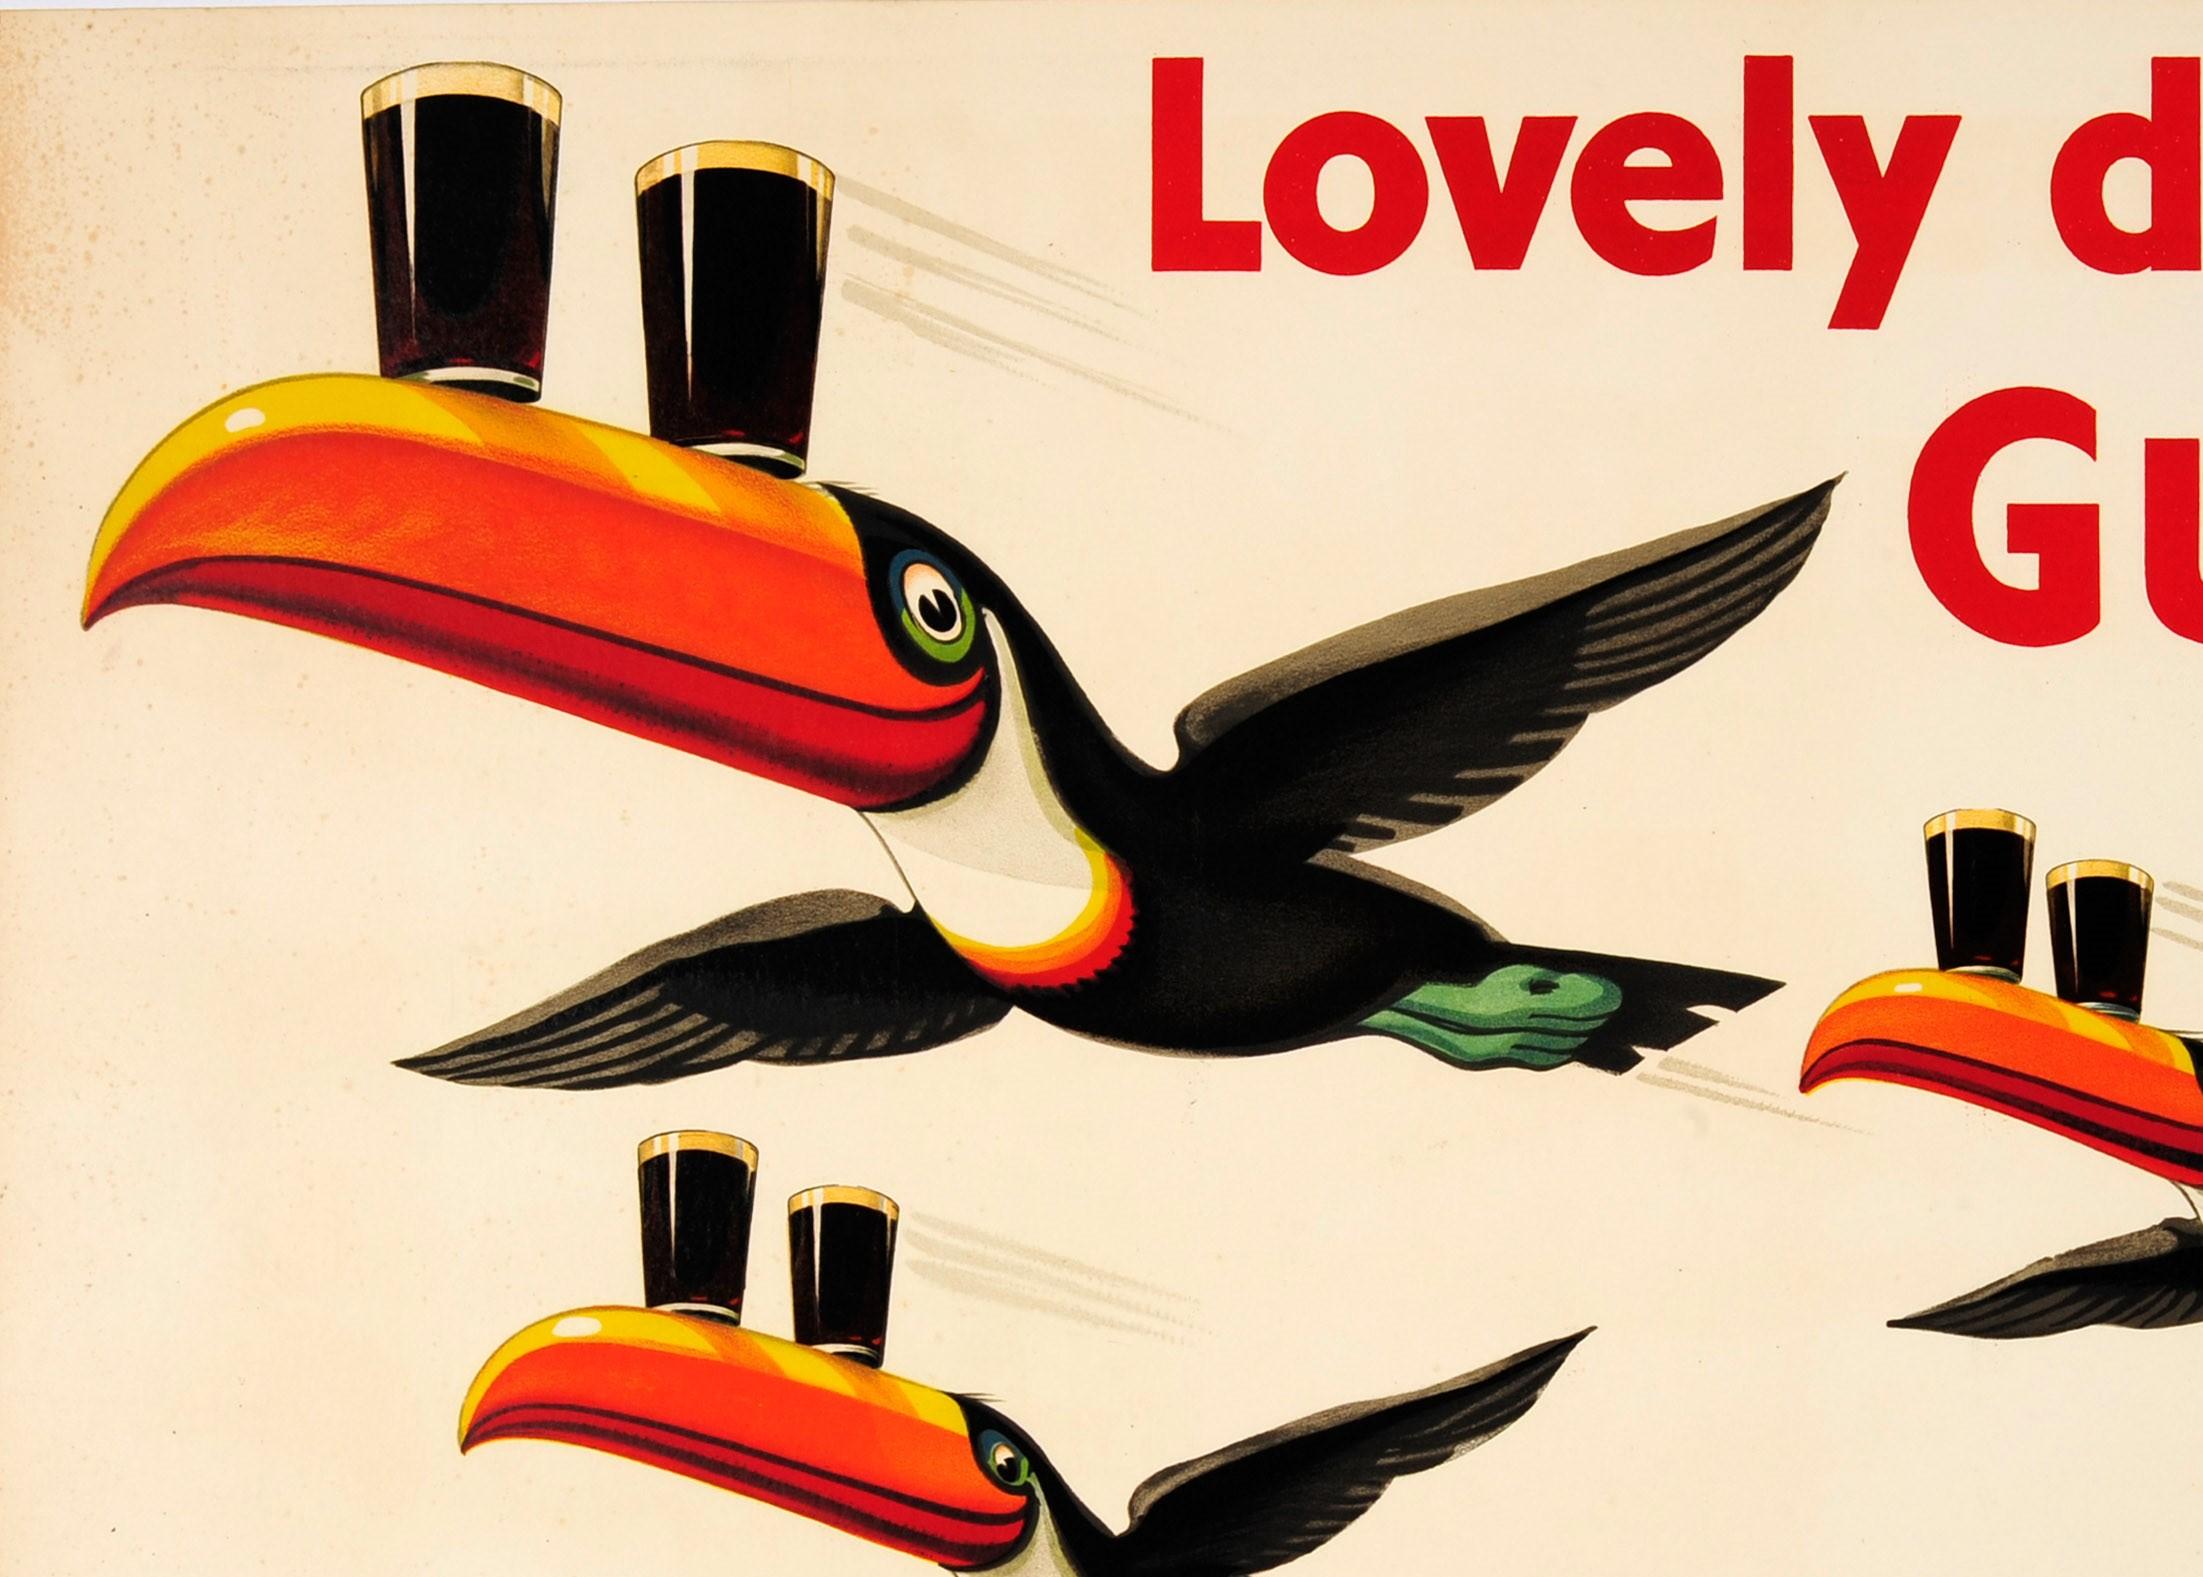 Original vintage Guinness advertising poster - Lovely Day for a Guinness - featuring an iconic design by the notable artist John Gilroy (John Thomas Young Gilroy; 1898-1985) depicting the brand's trademark smiling toucans flying in formation over a